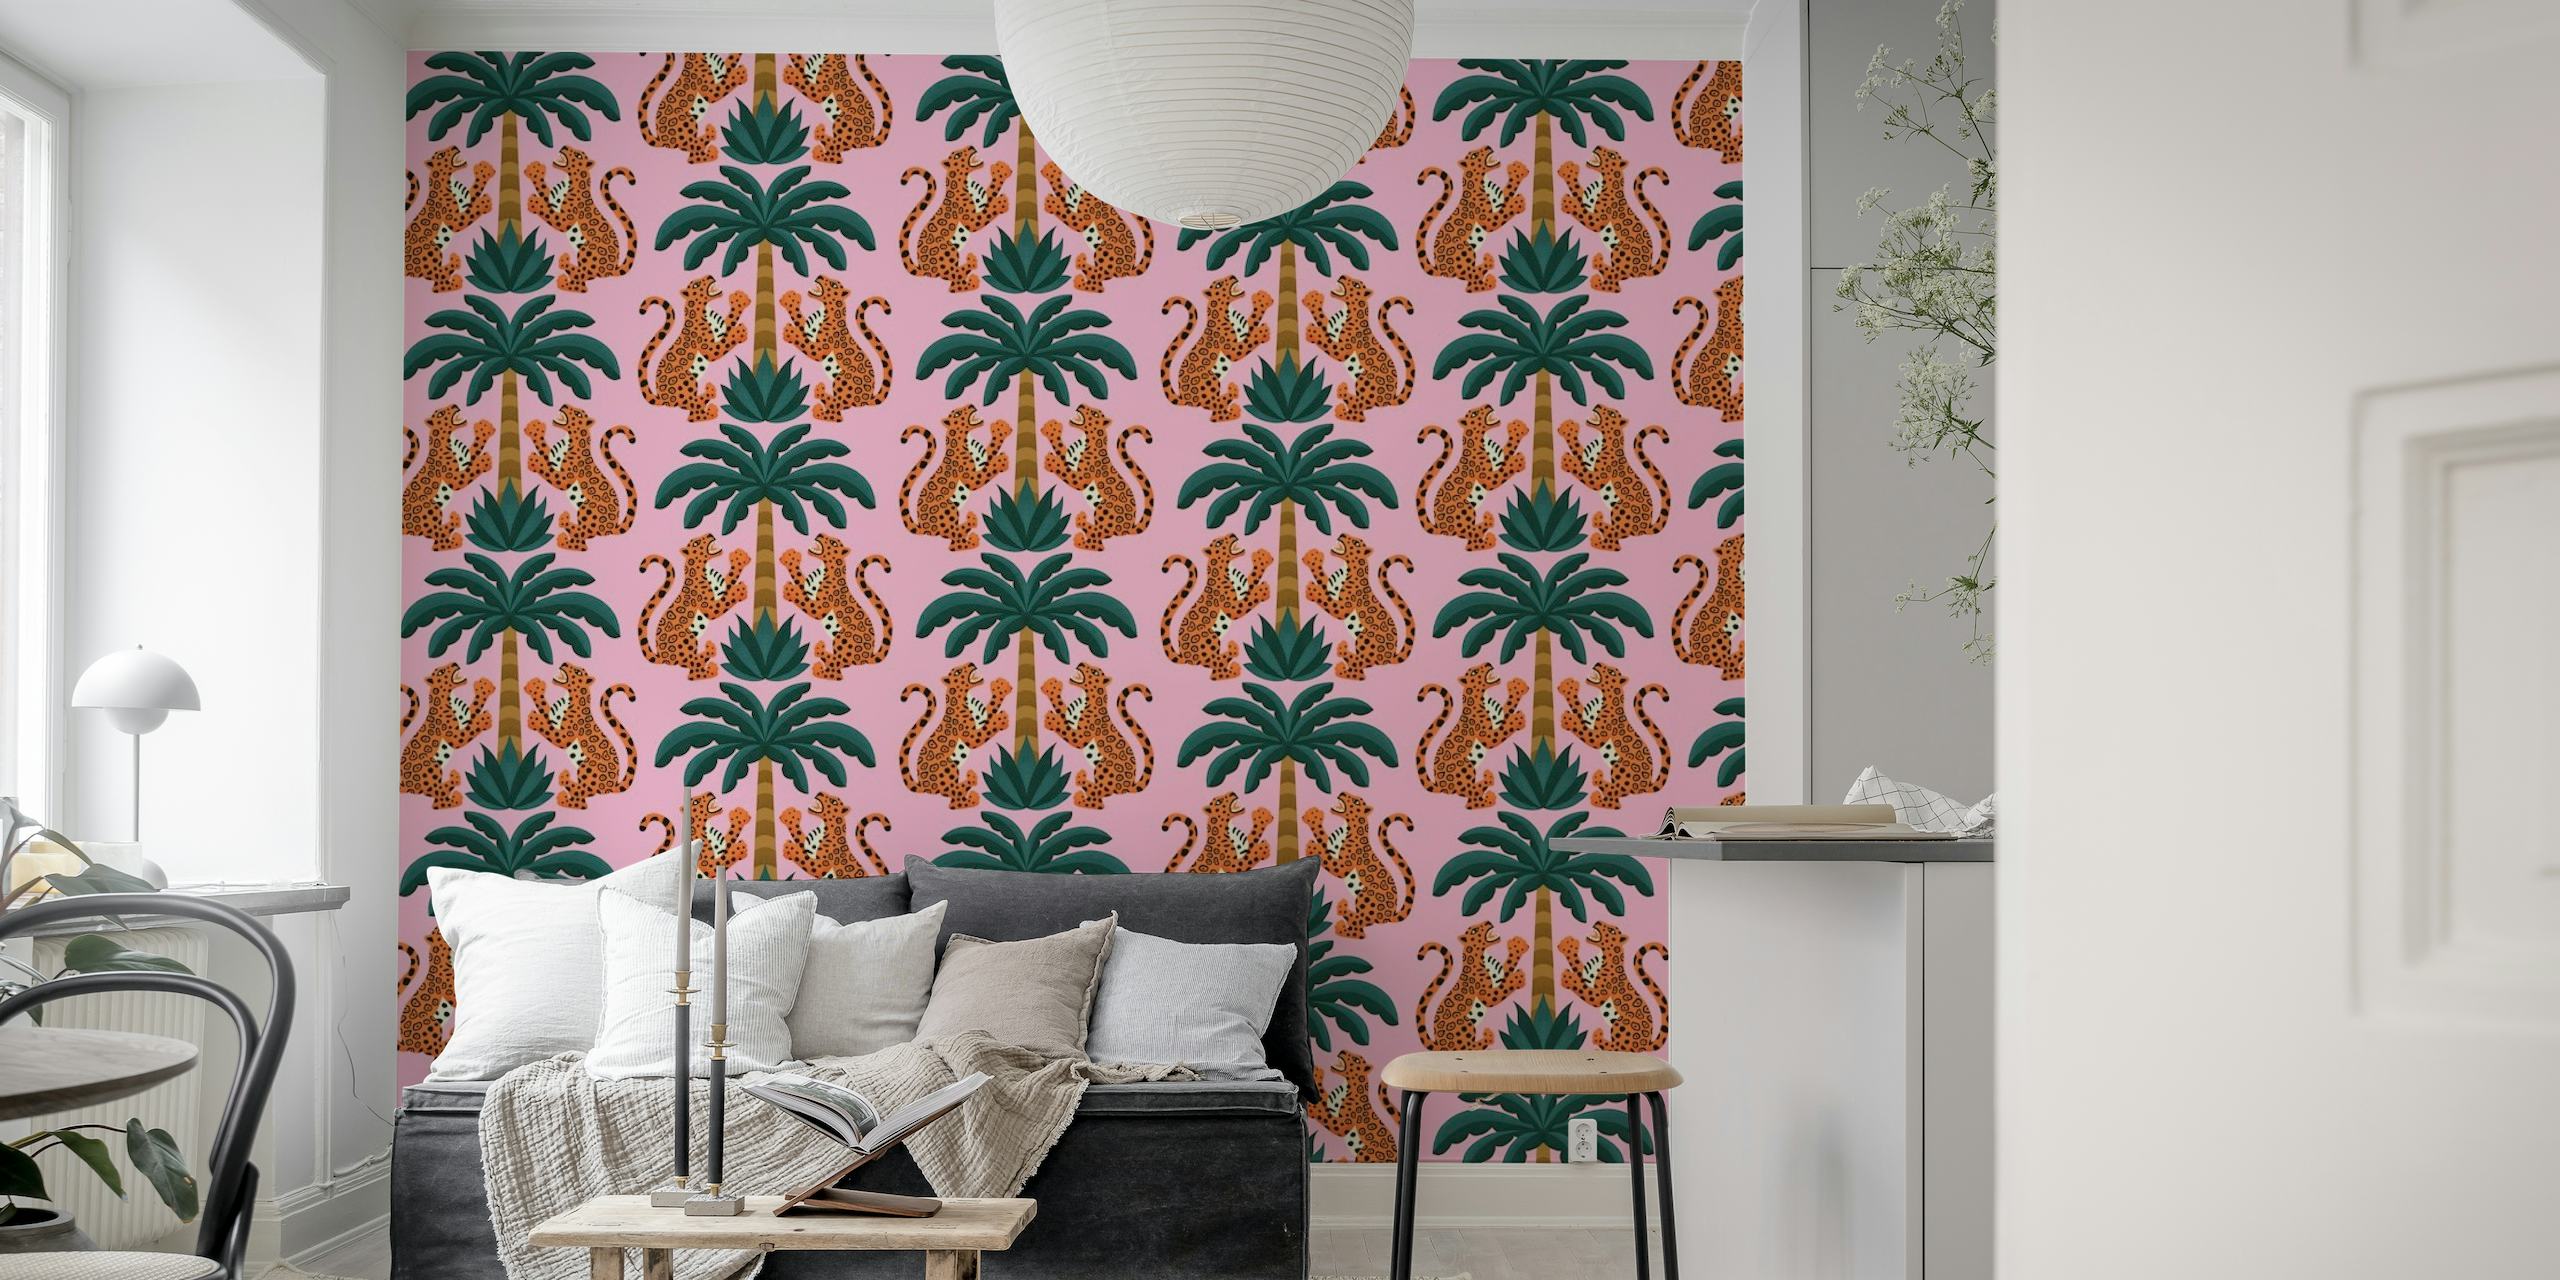 Exotic jaguars and palm fronds wall mural on a pink background